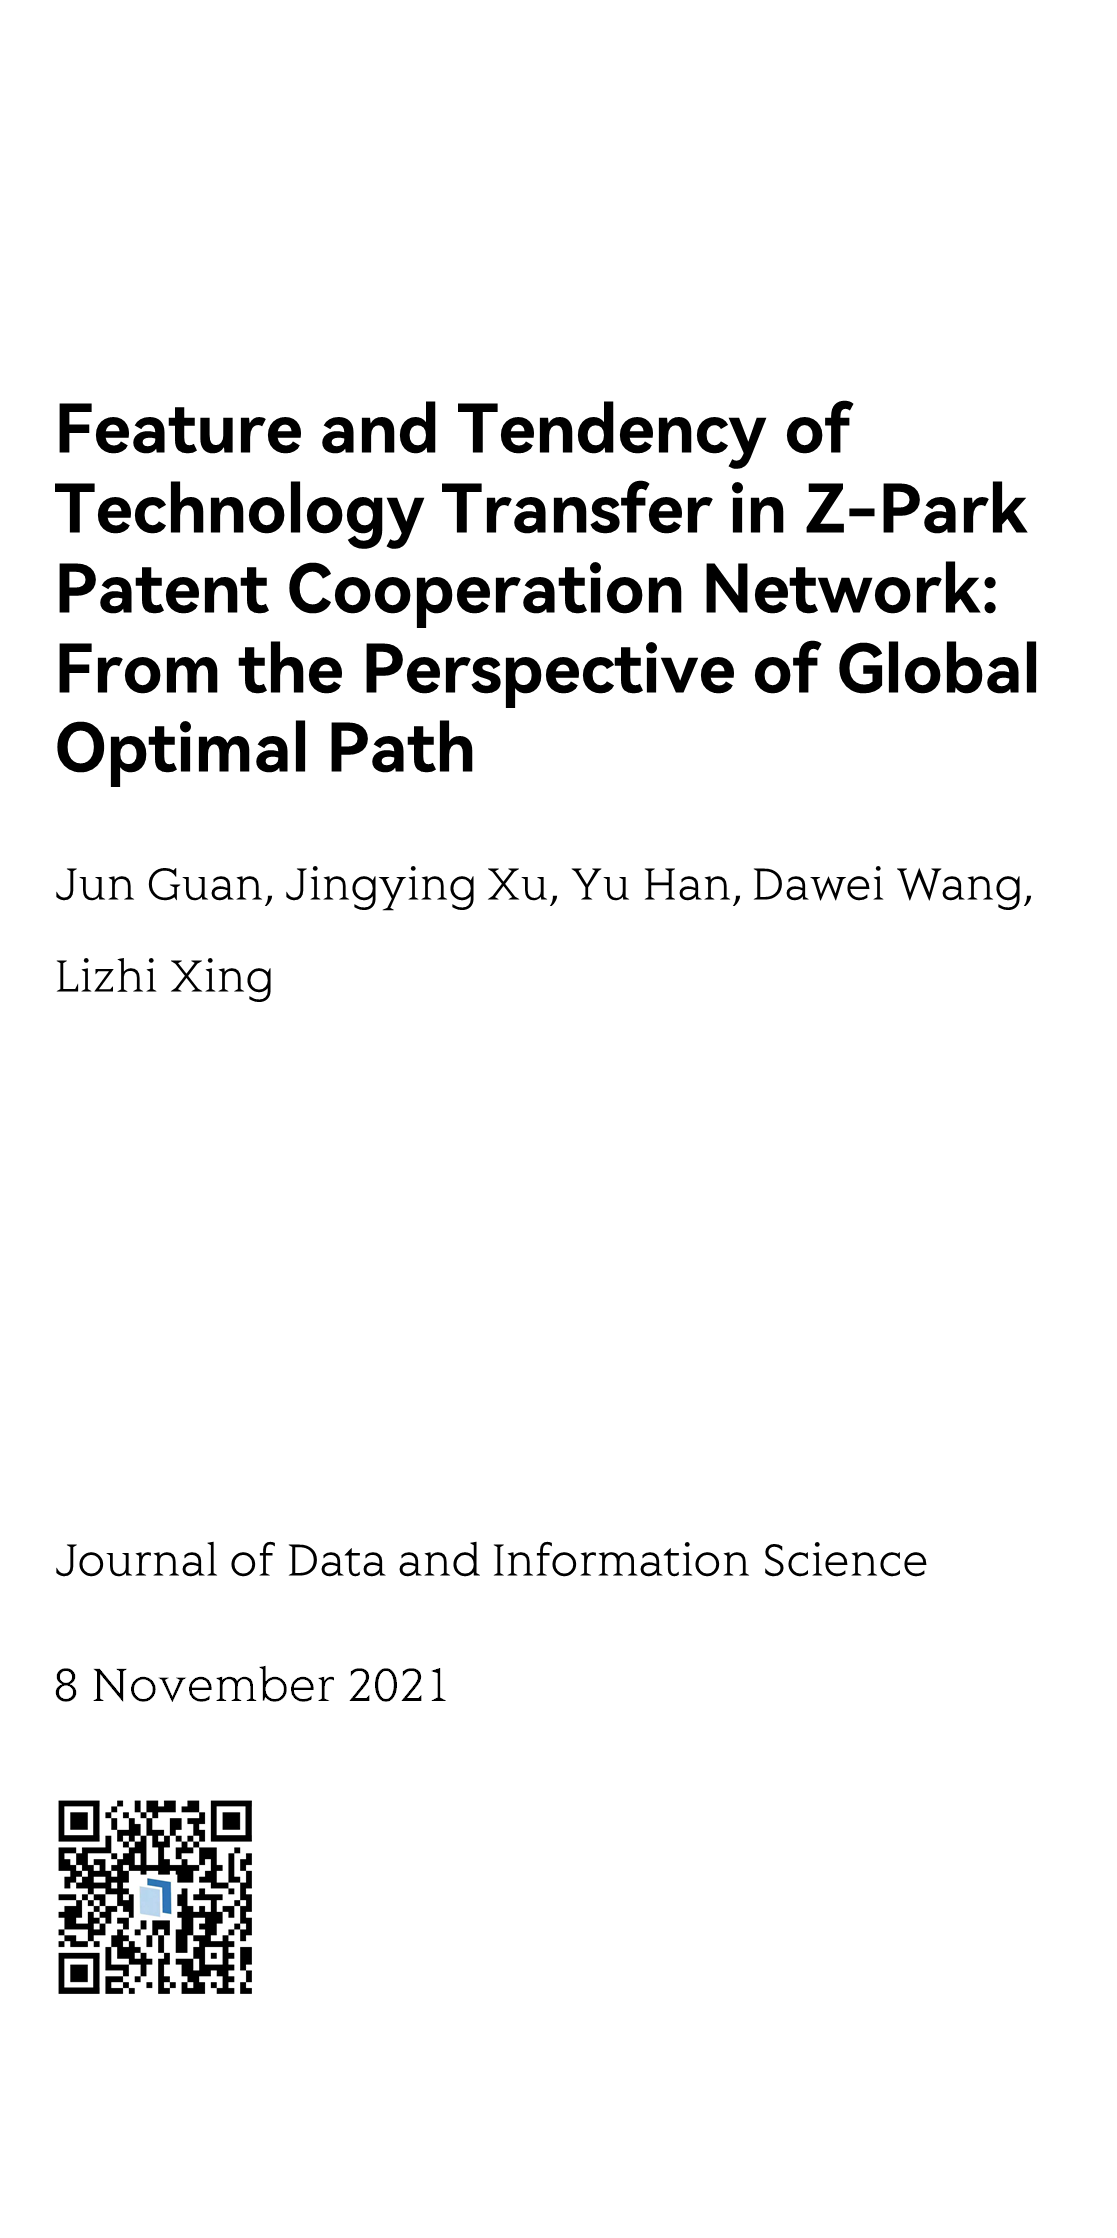 Feature and Tendency of Technology Transfer in Z-Park Patent Cooperation Network: From the Perspective of Global Optimal Path_1